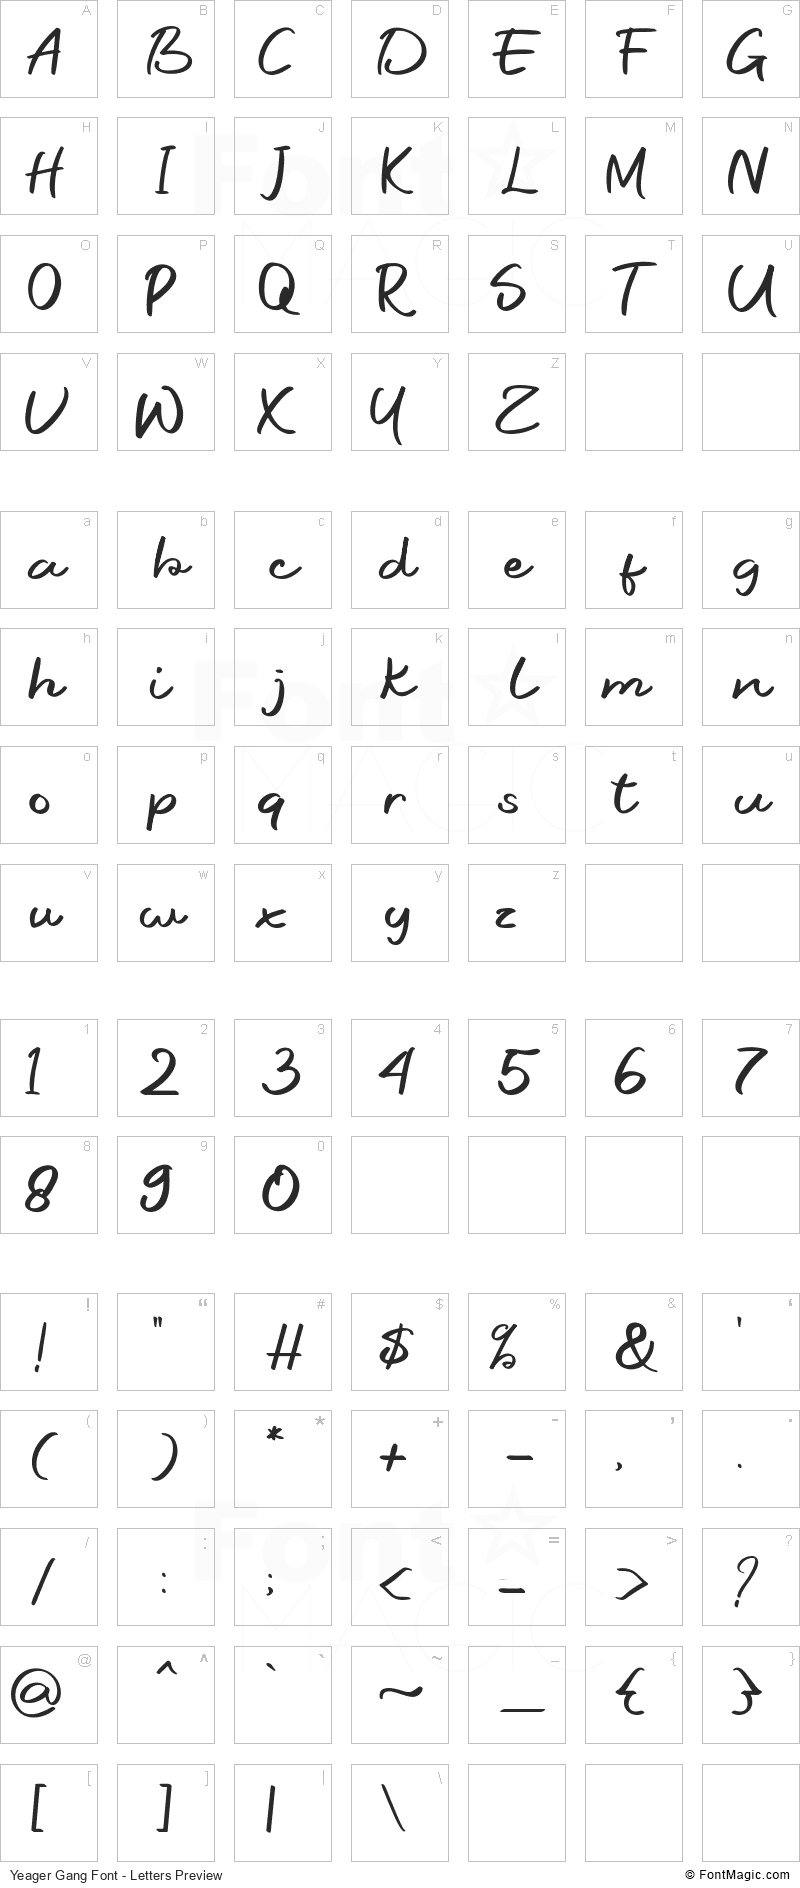 Yeager Gang Font - All Latters Preview Chart